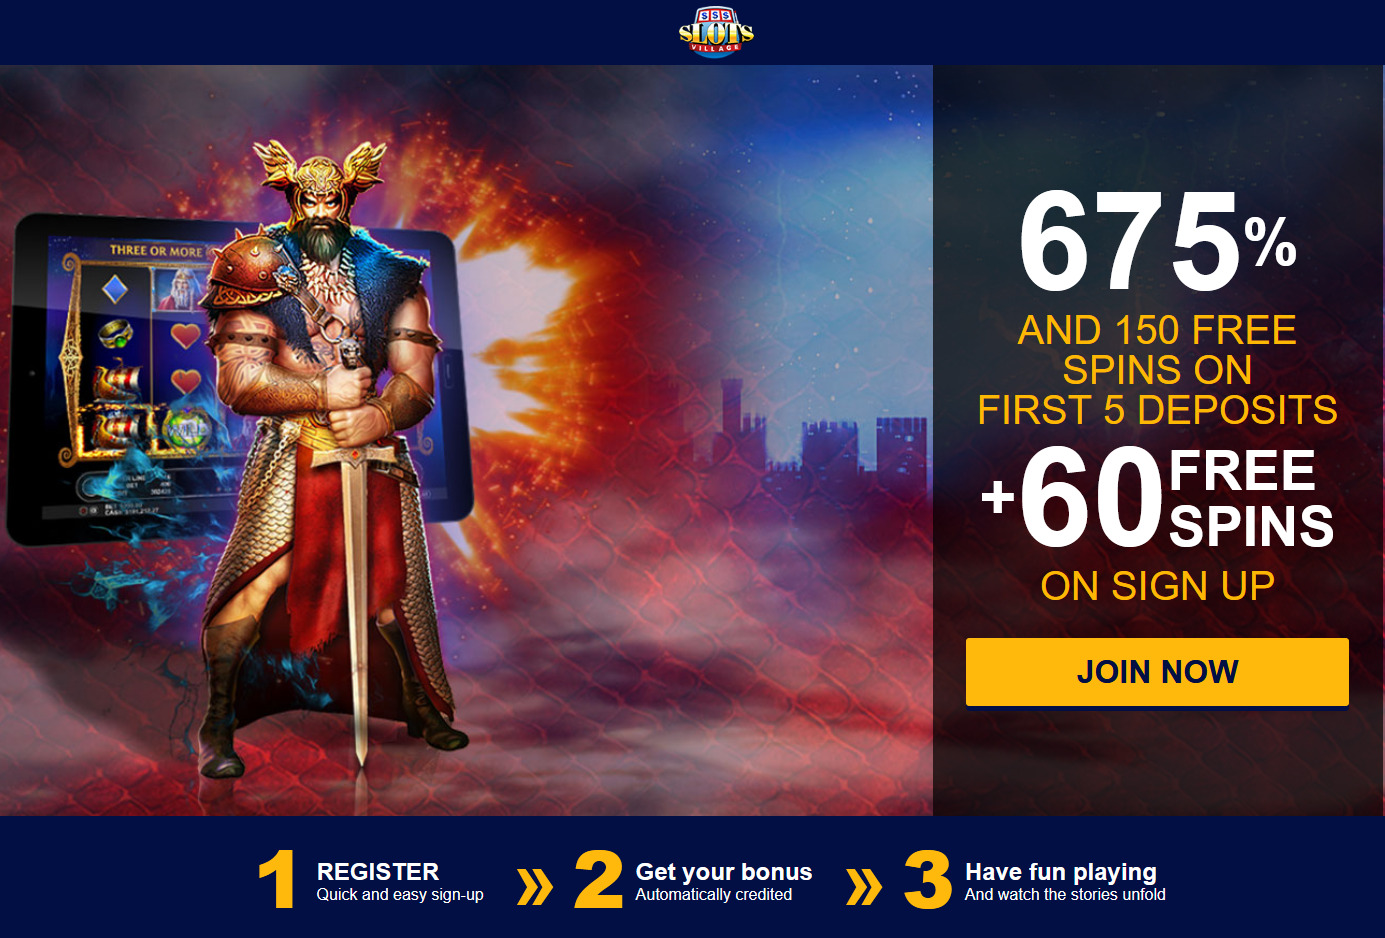 Slots Village Casino - 675% + 60 free spins. Game: Beowulf